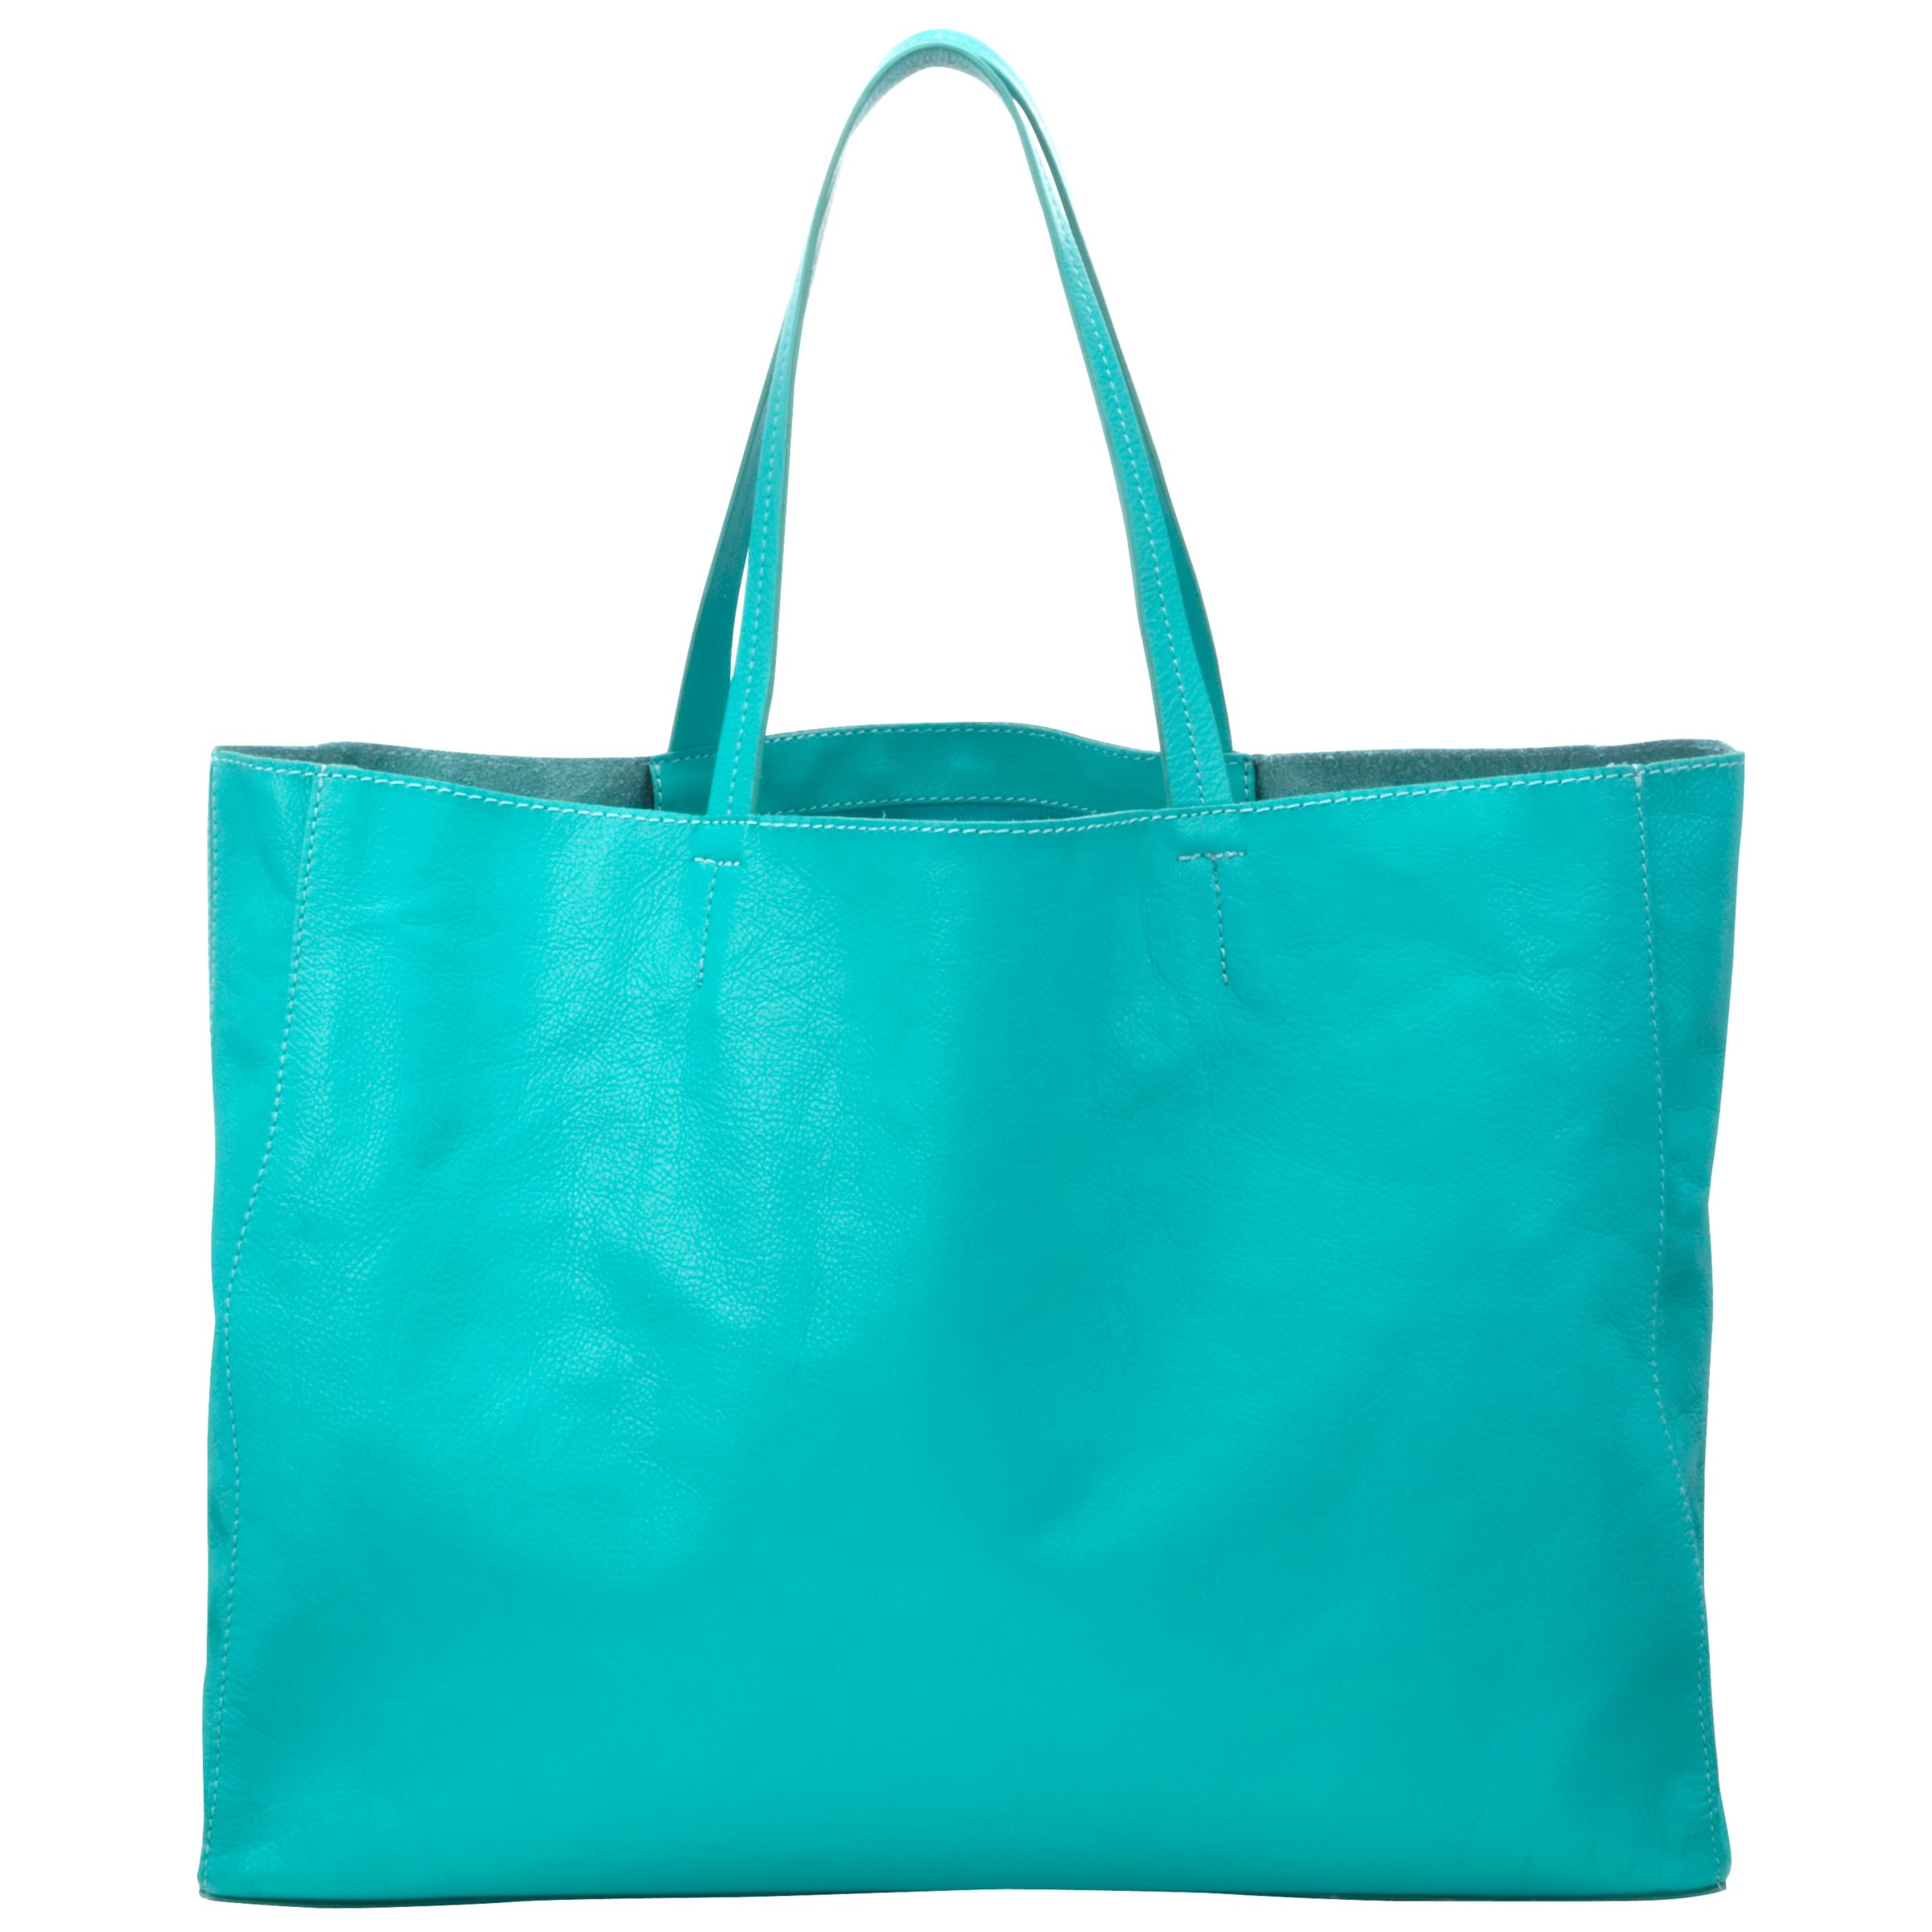 Collection WEEKEND by John Lewis Morgan Leather Tote Bag